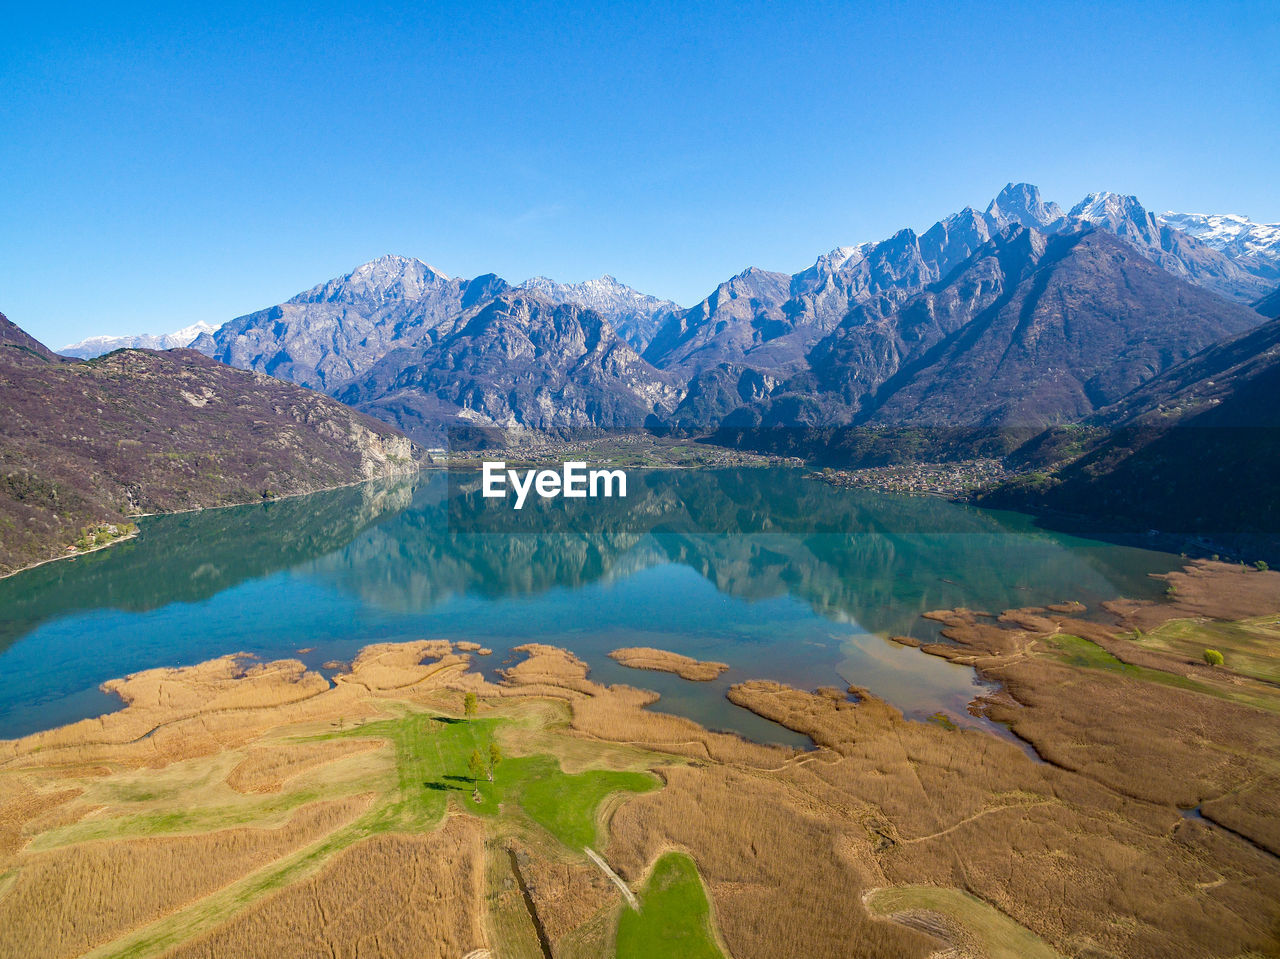 SCENIC VIEW OF LAKE BY MOUNTAINS AGAINST CLEAR BLUE SKY